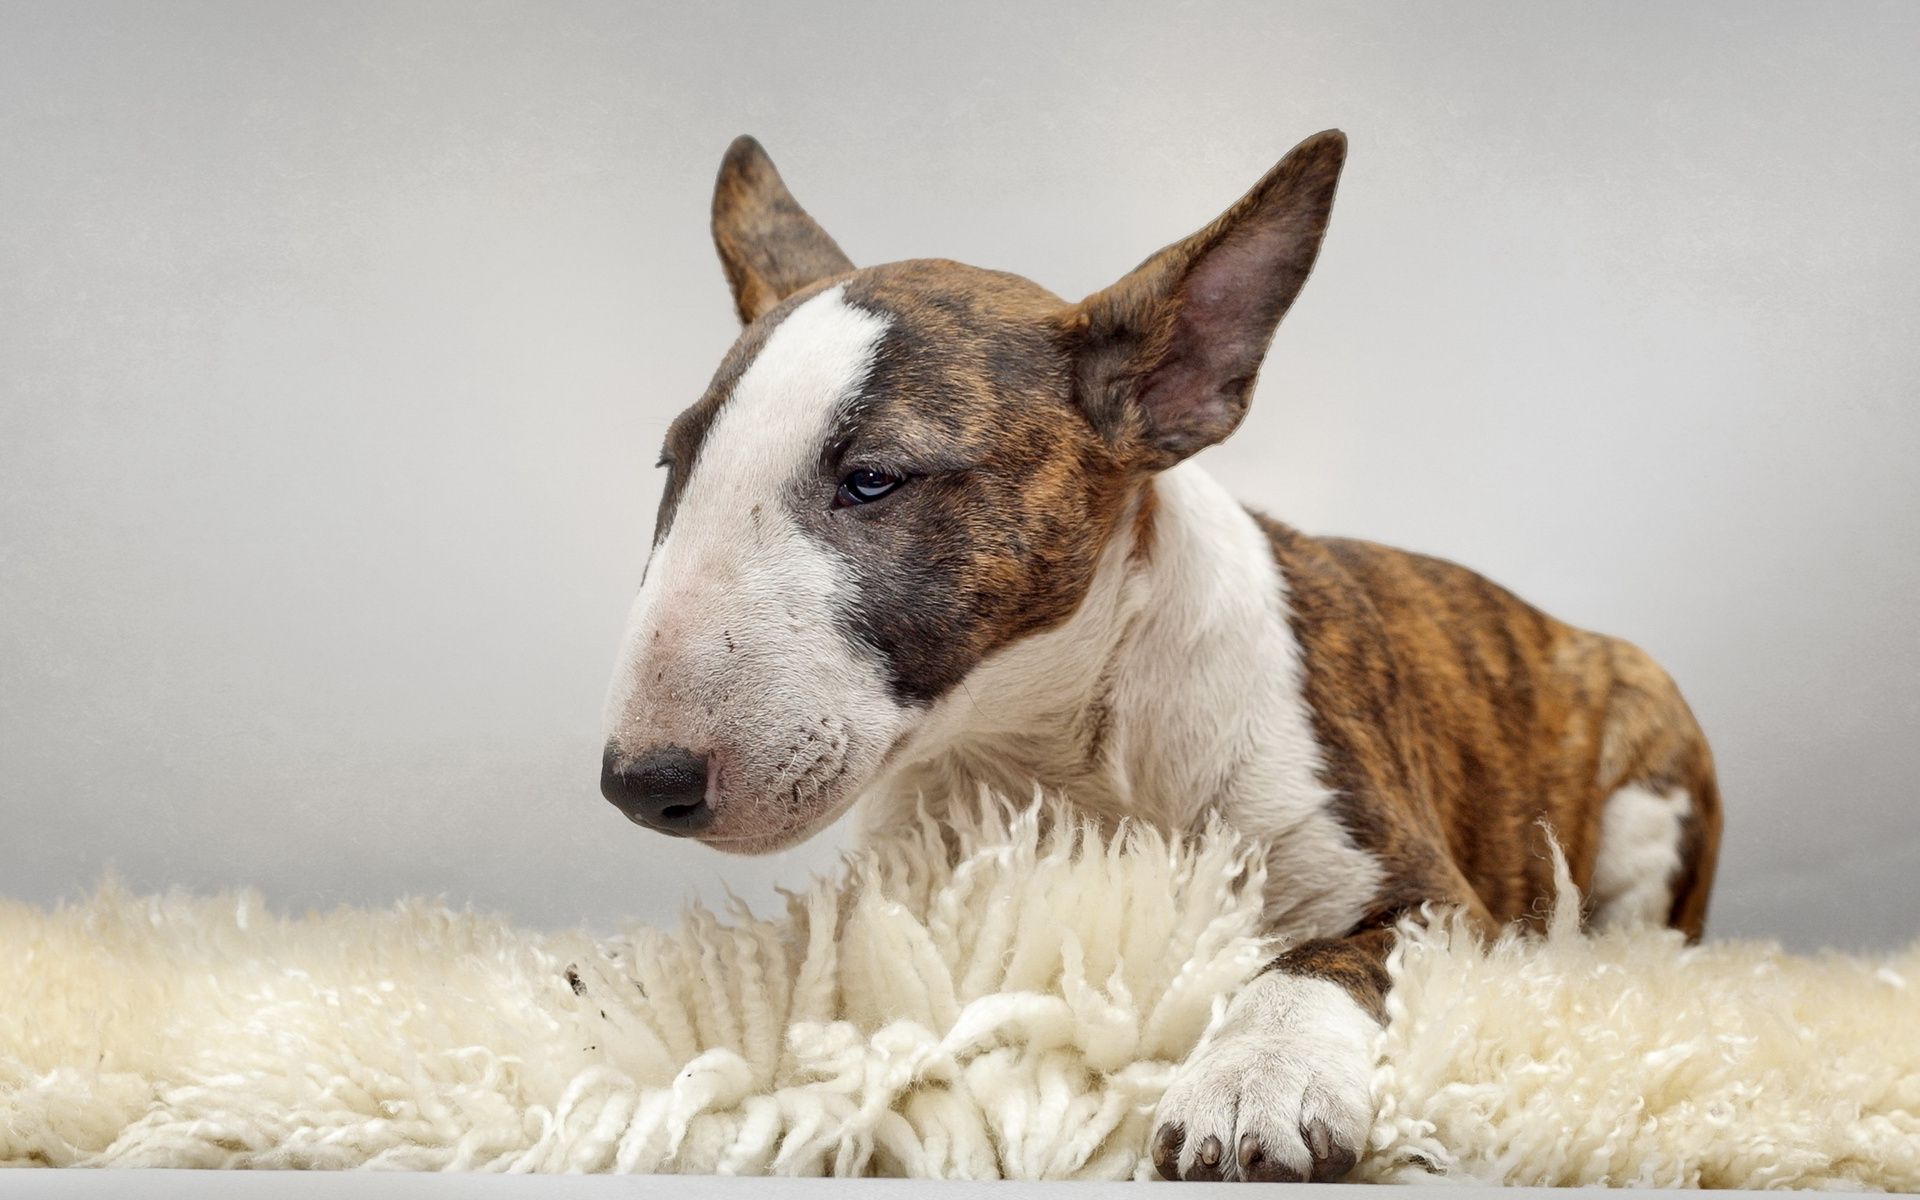 Bull Terrier Wallpaper Image Photos Pictures Background